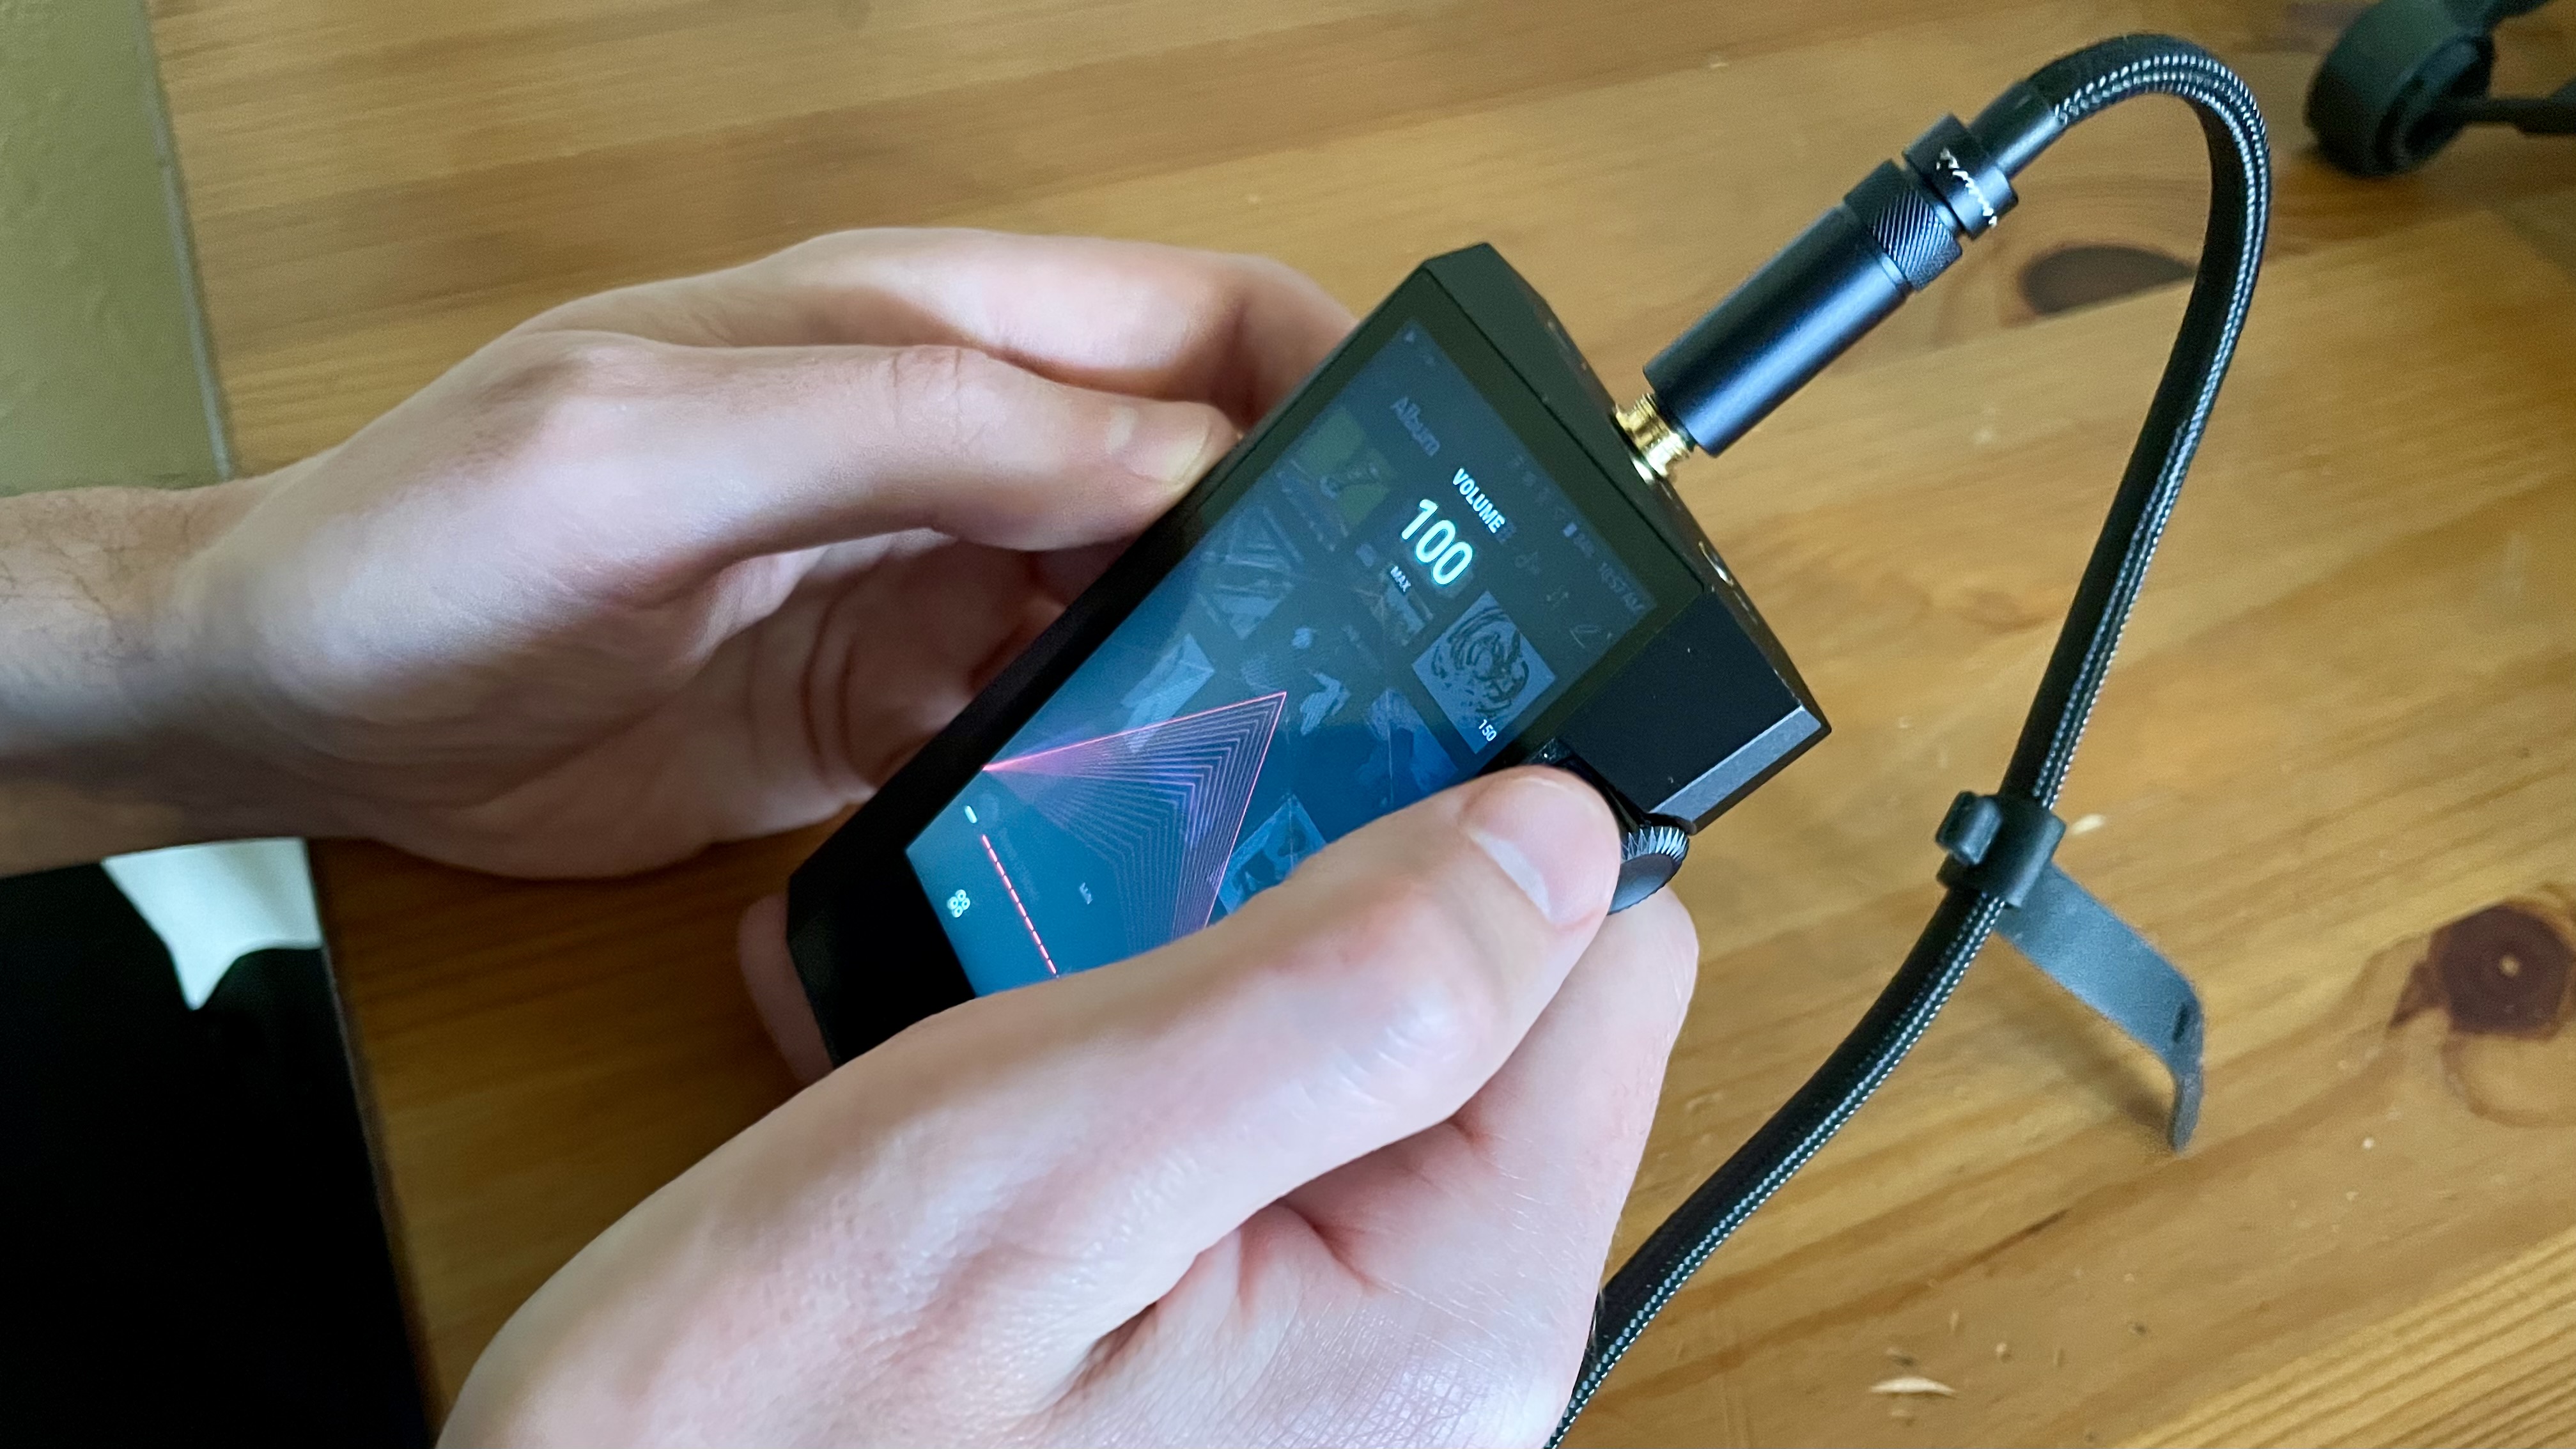 Astell & Kern A&norma SR35 held in a hand, scrolling the volume up to 120